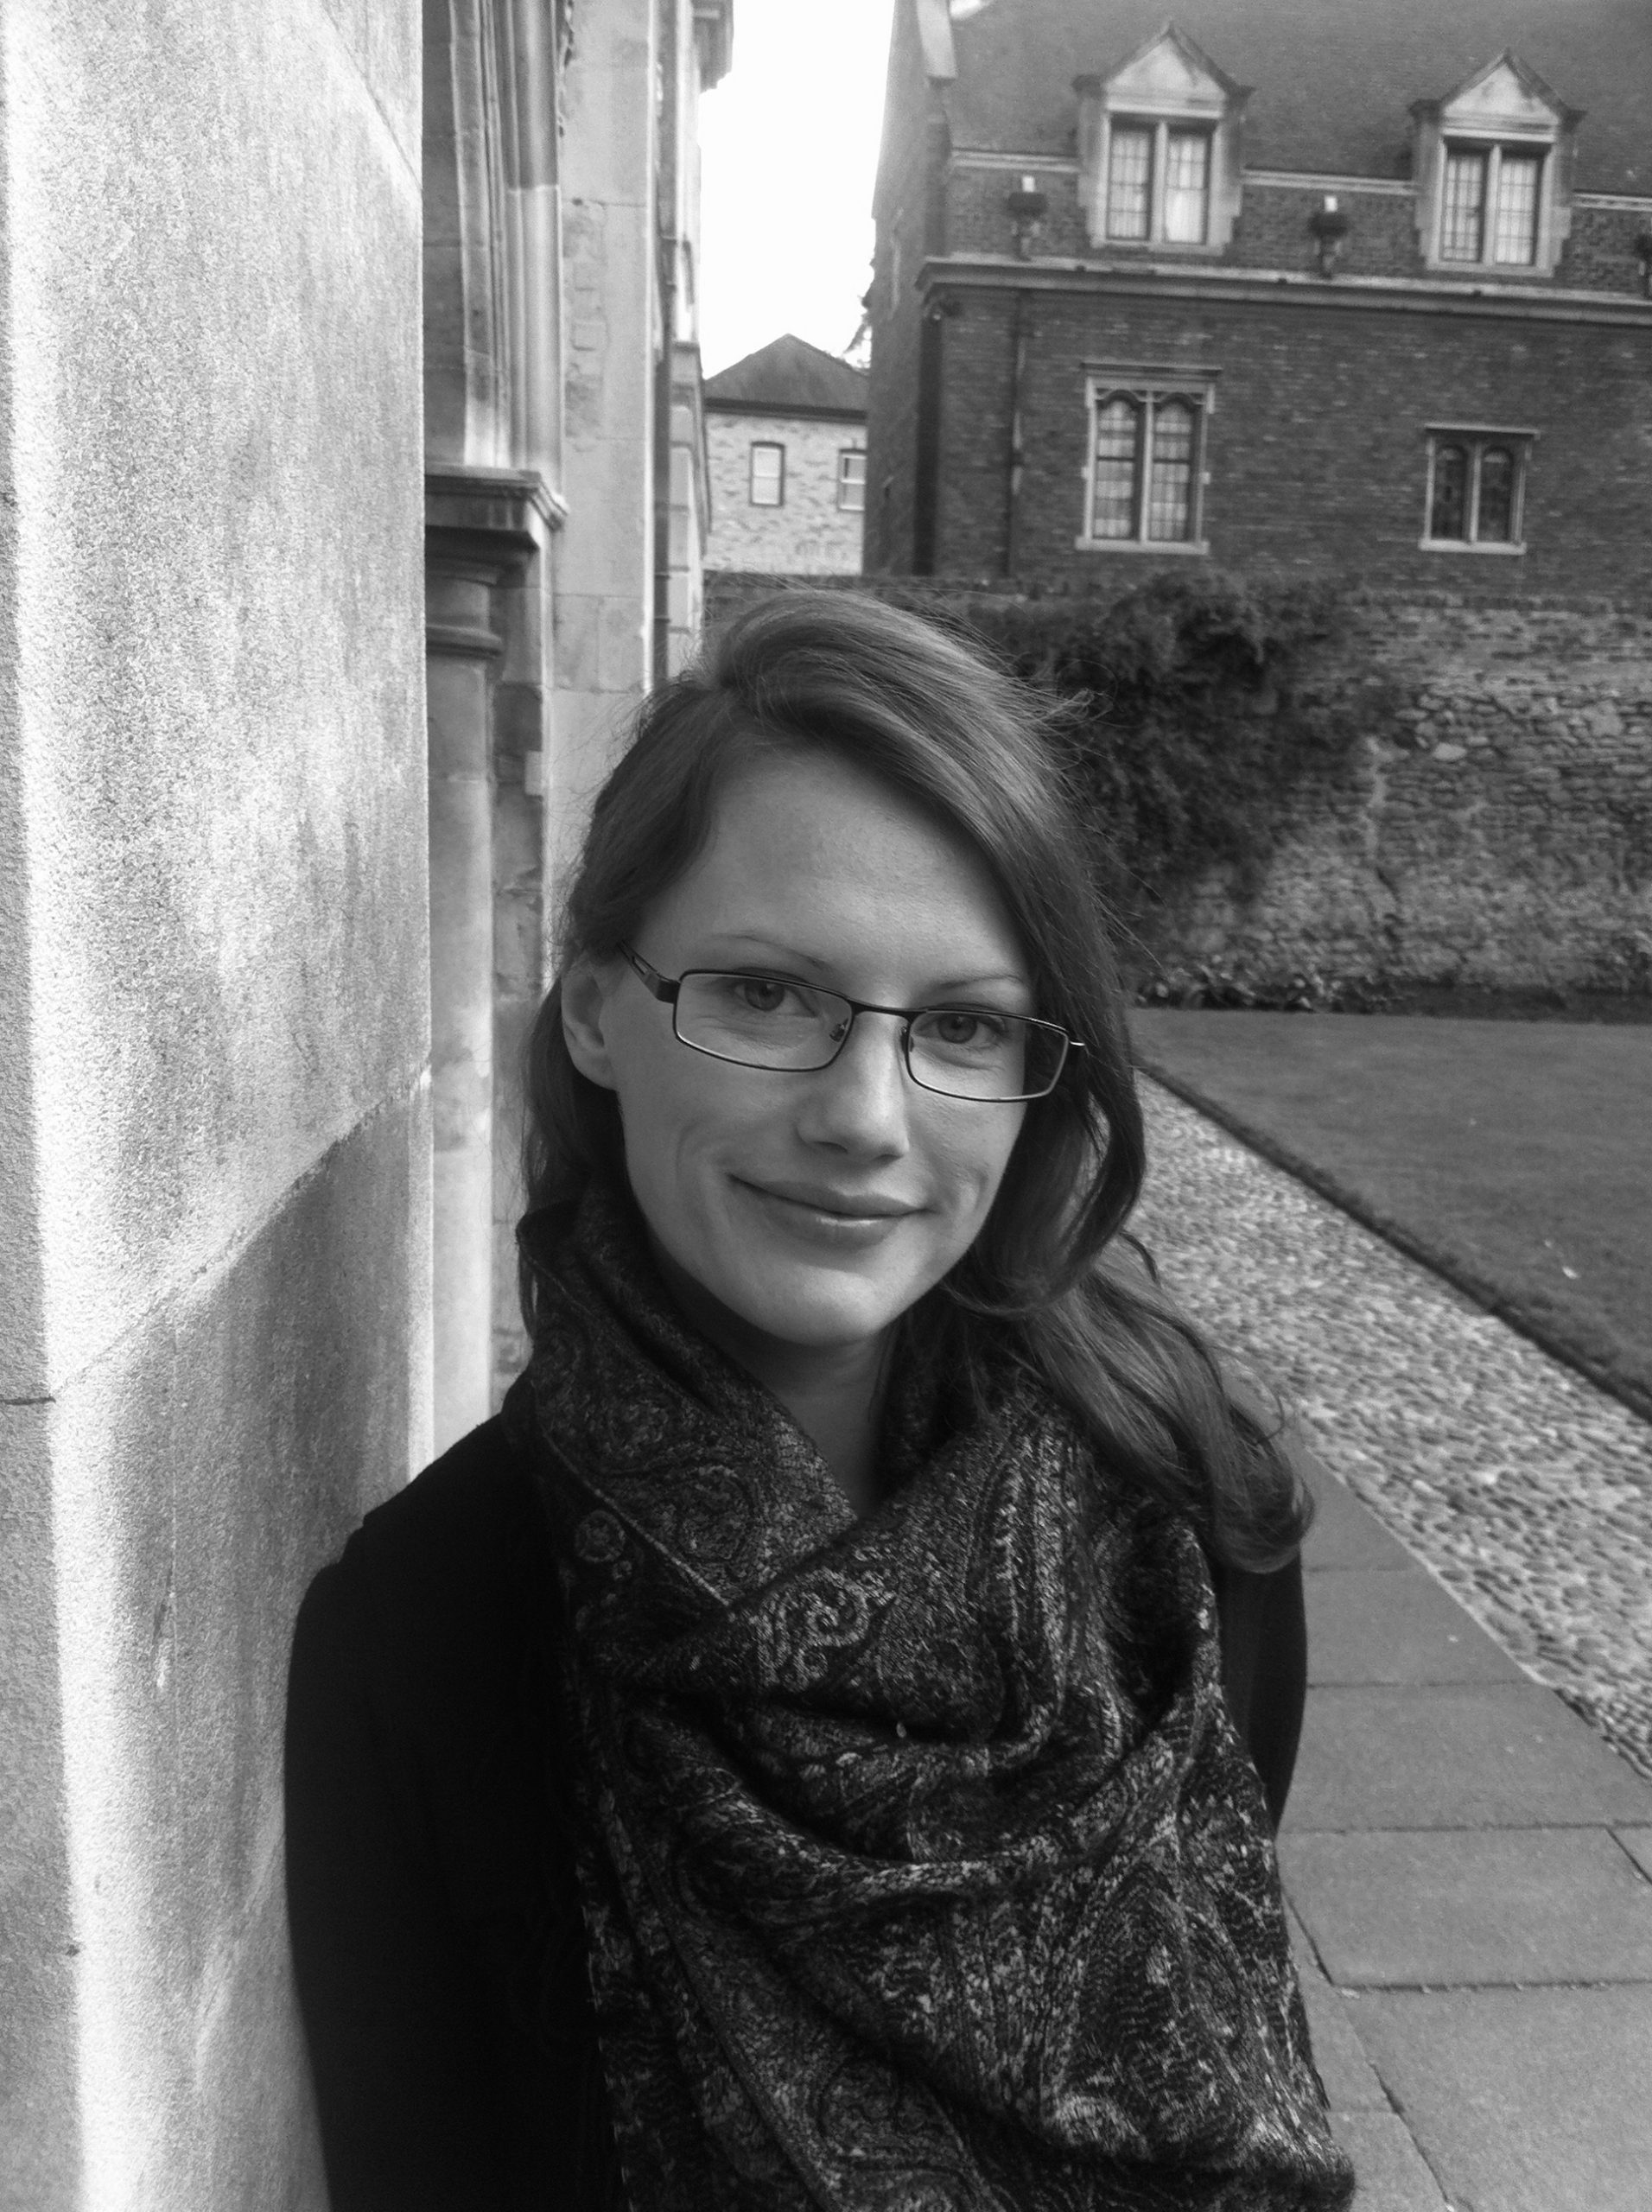 Scholar shortlisted for BBC New Generation Thinker